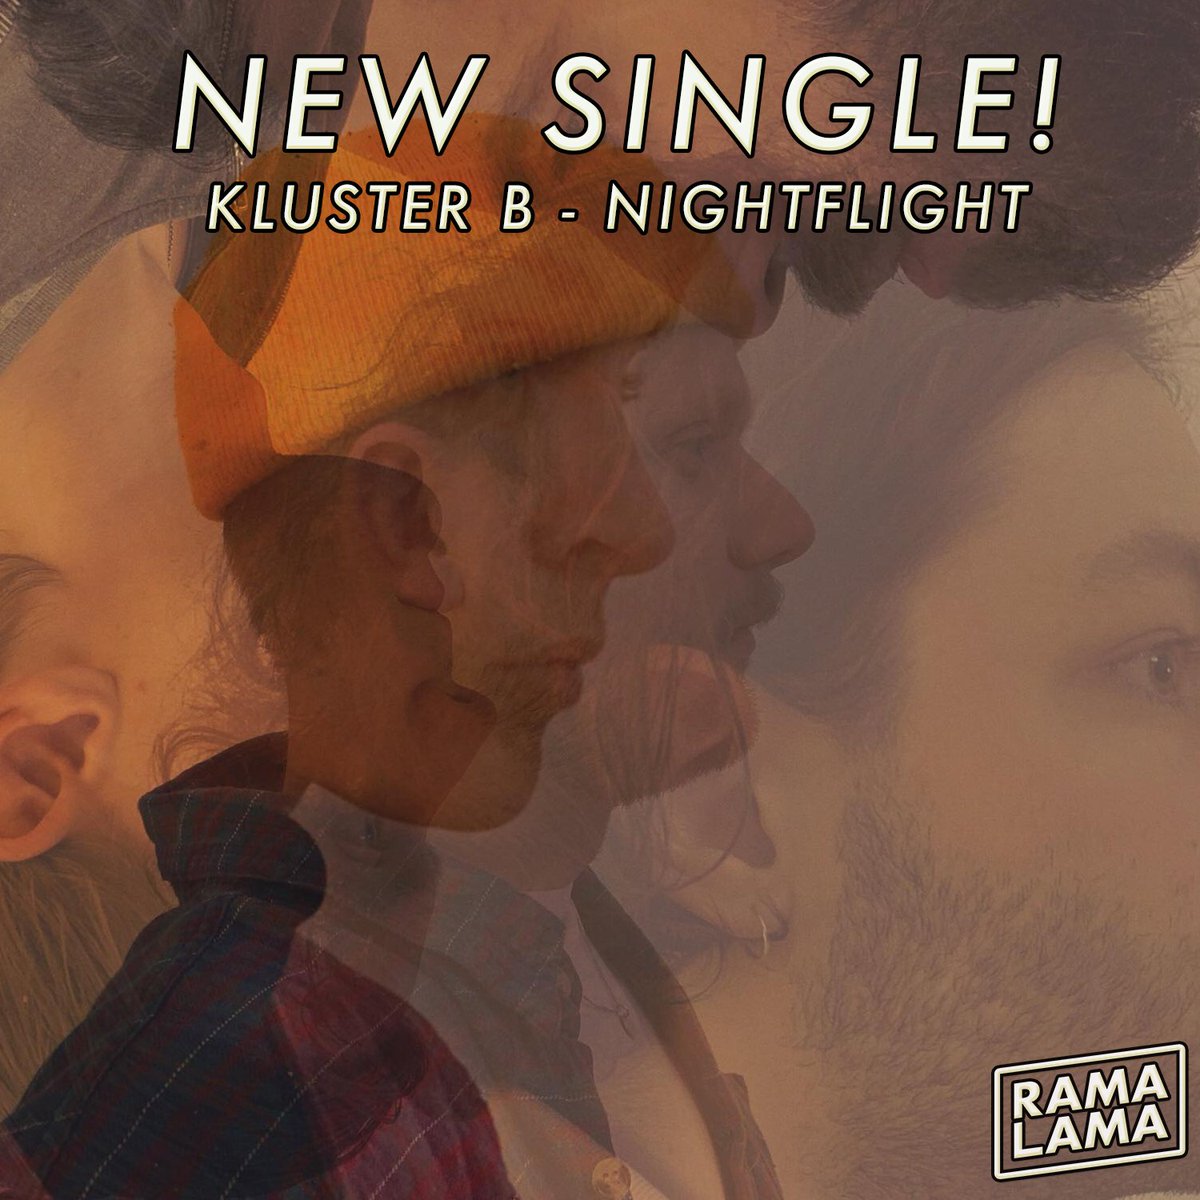 New @klusterformusic out now! 'Nightflight' is a track that has Kluster B written all over it, this band never stops to impress and push the limits without losing accessibility. Stream: ffm.to/klusterbnf